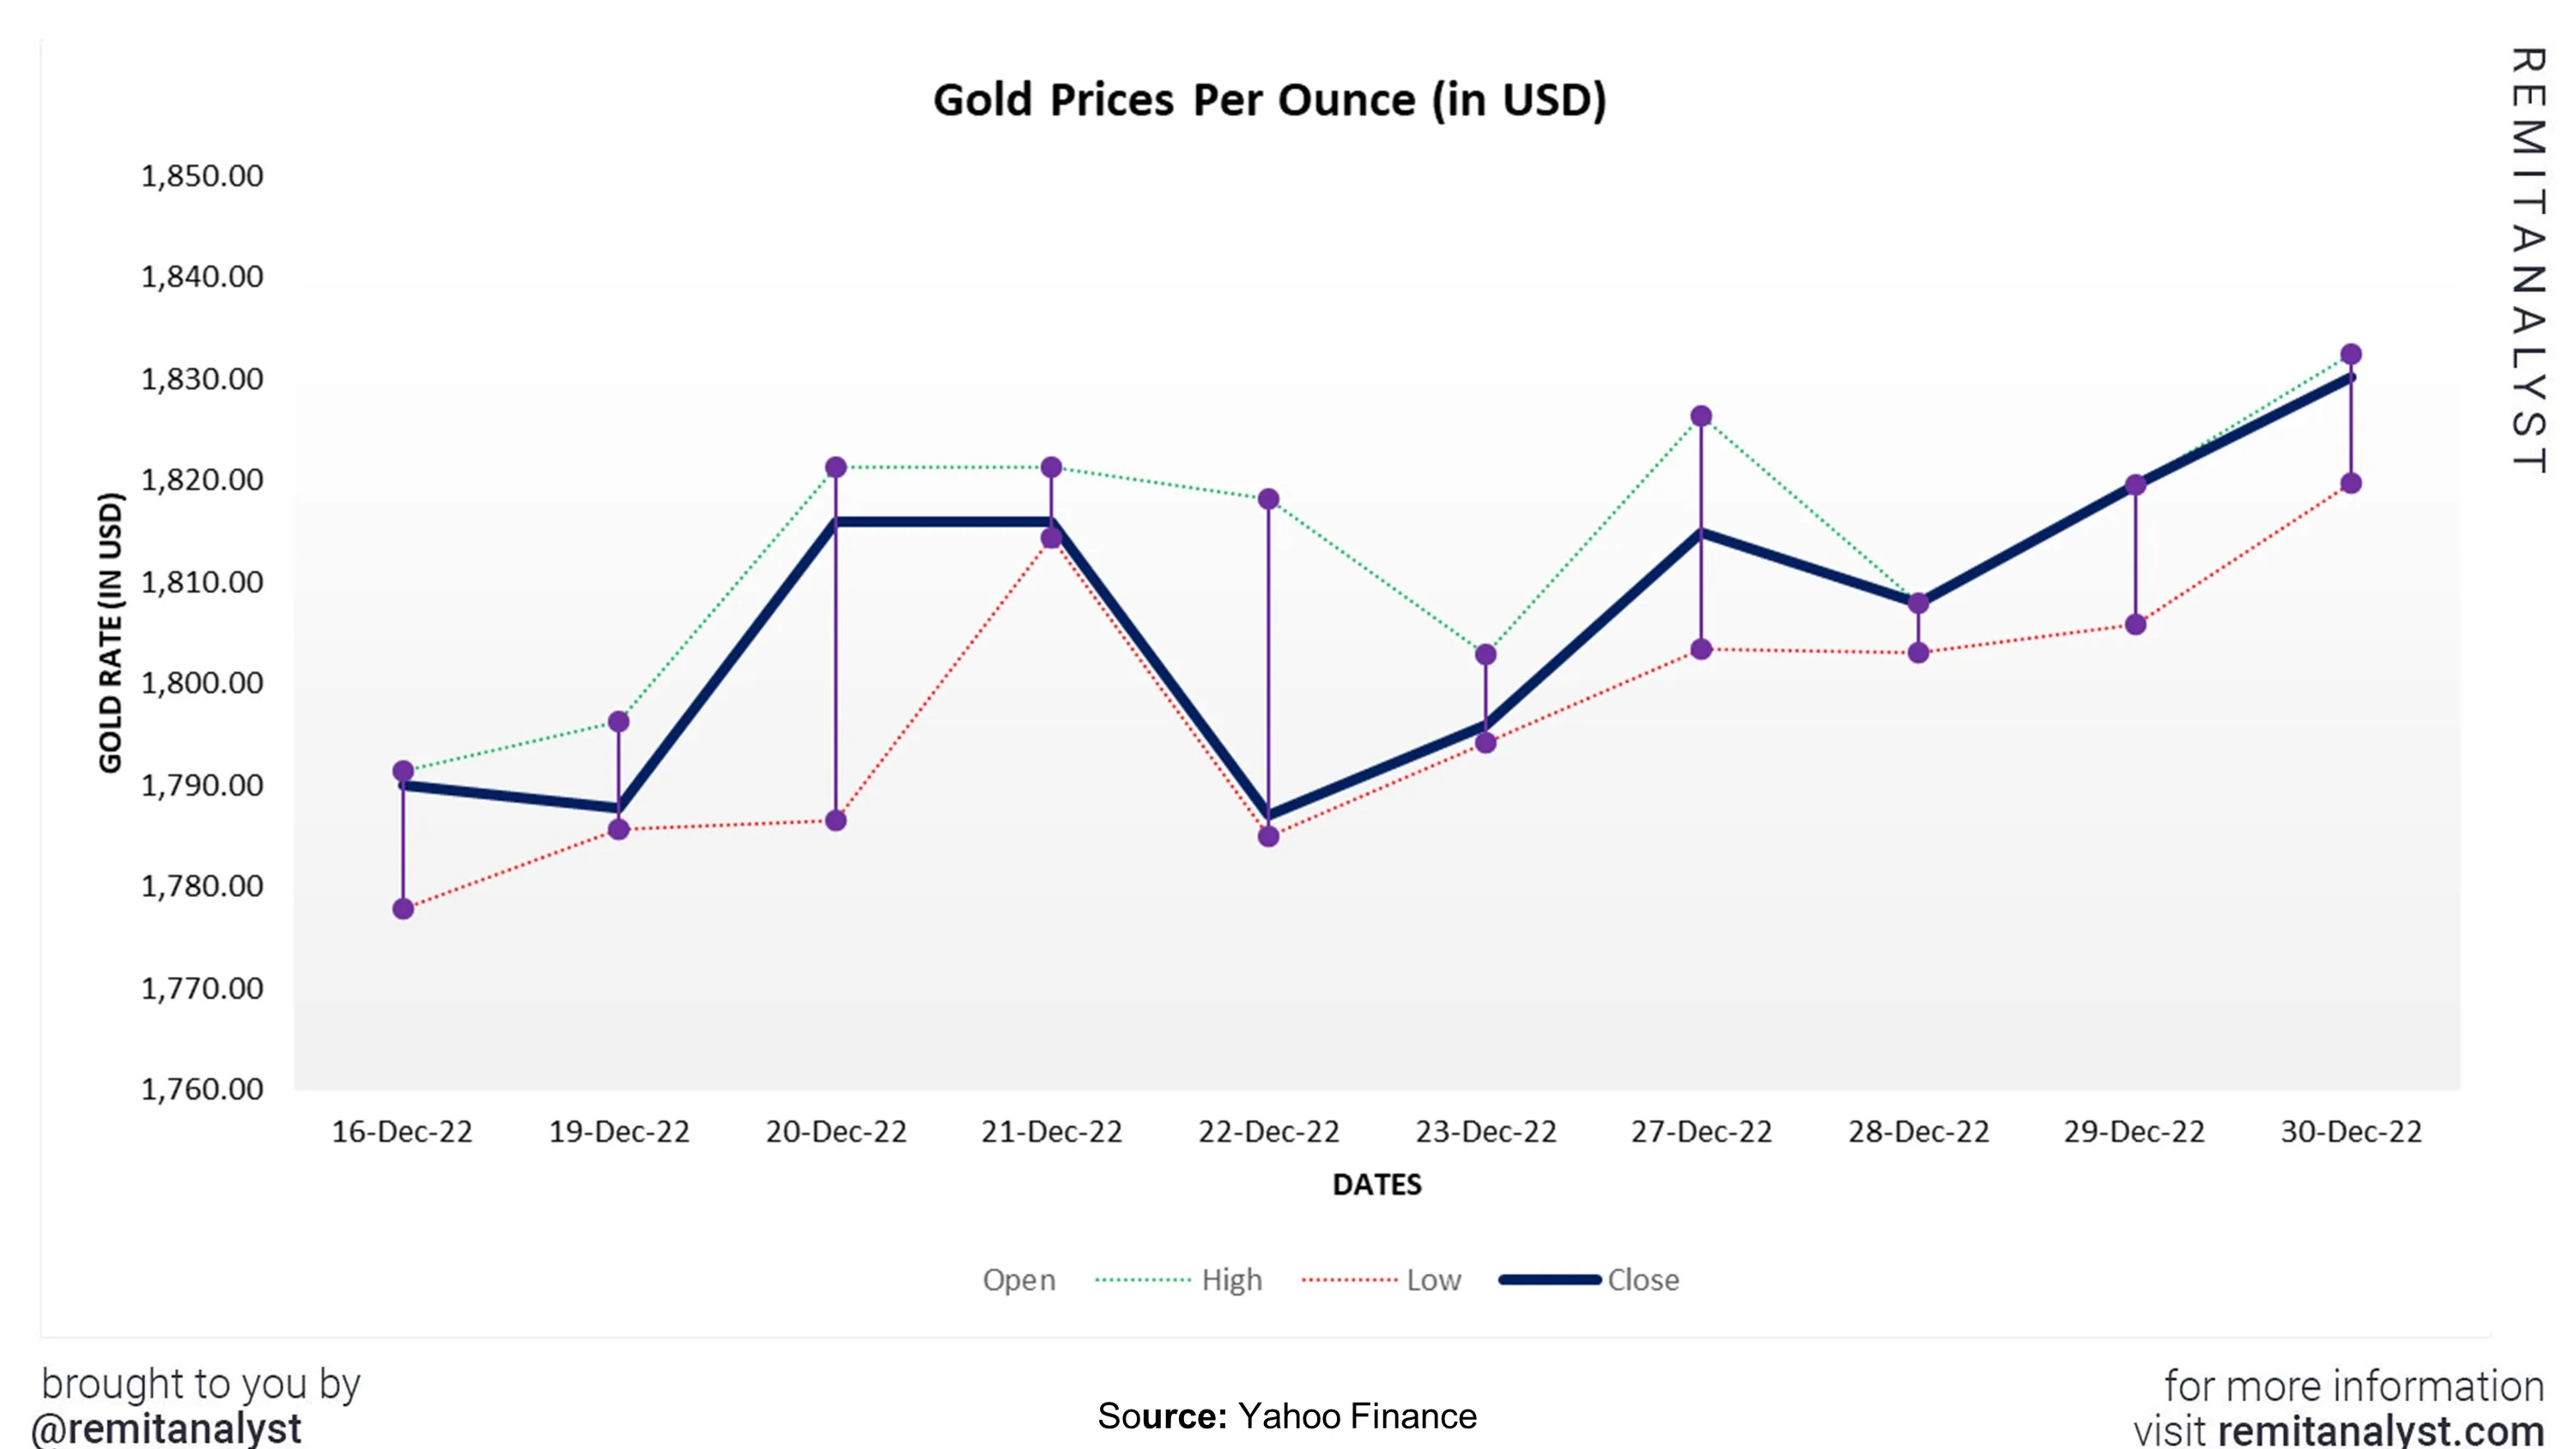 gold-prices-from-16-dec-2022-to-30-dec-2022